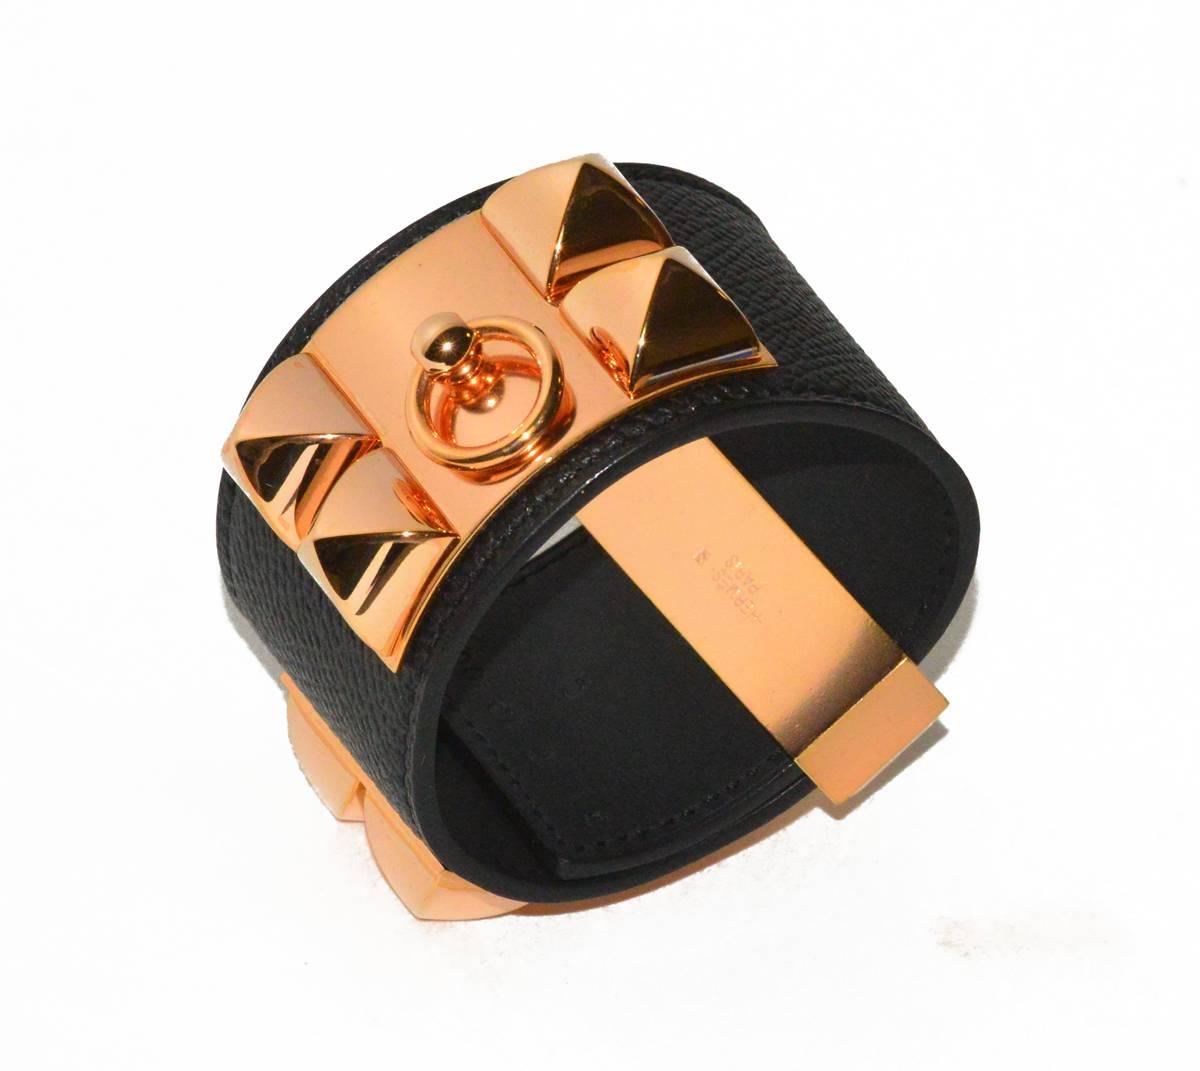 Iconic Hermes PINK gold (plate) Collier de Chien cuff in pristine, new condition with box.